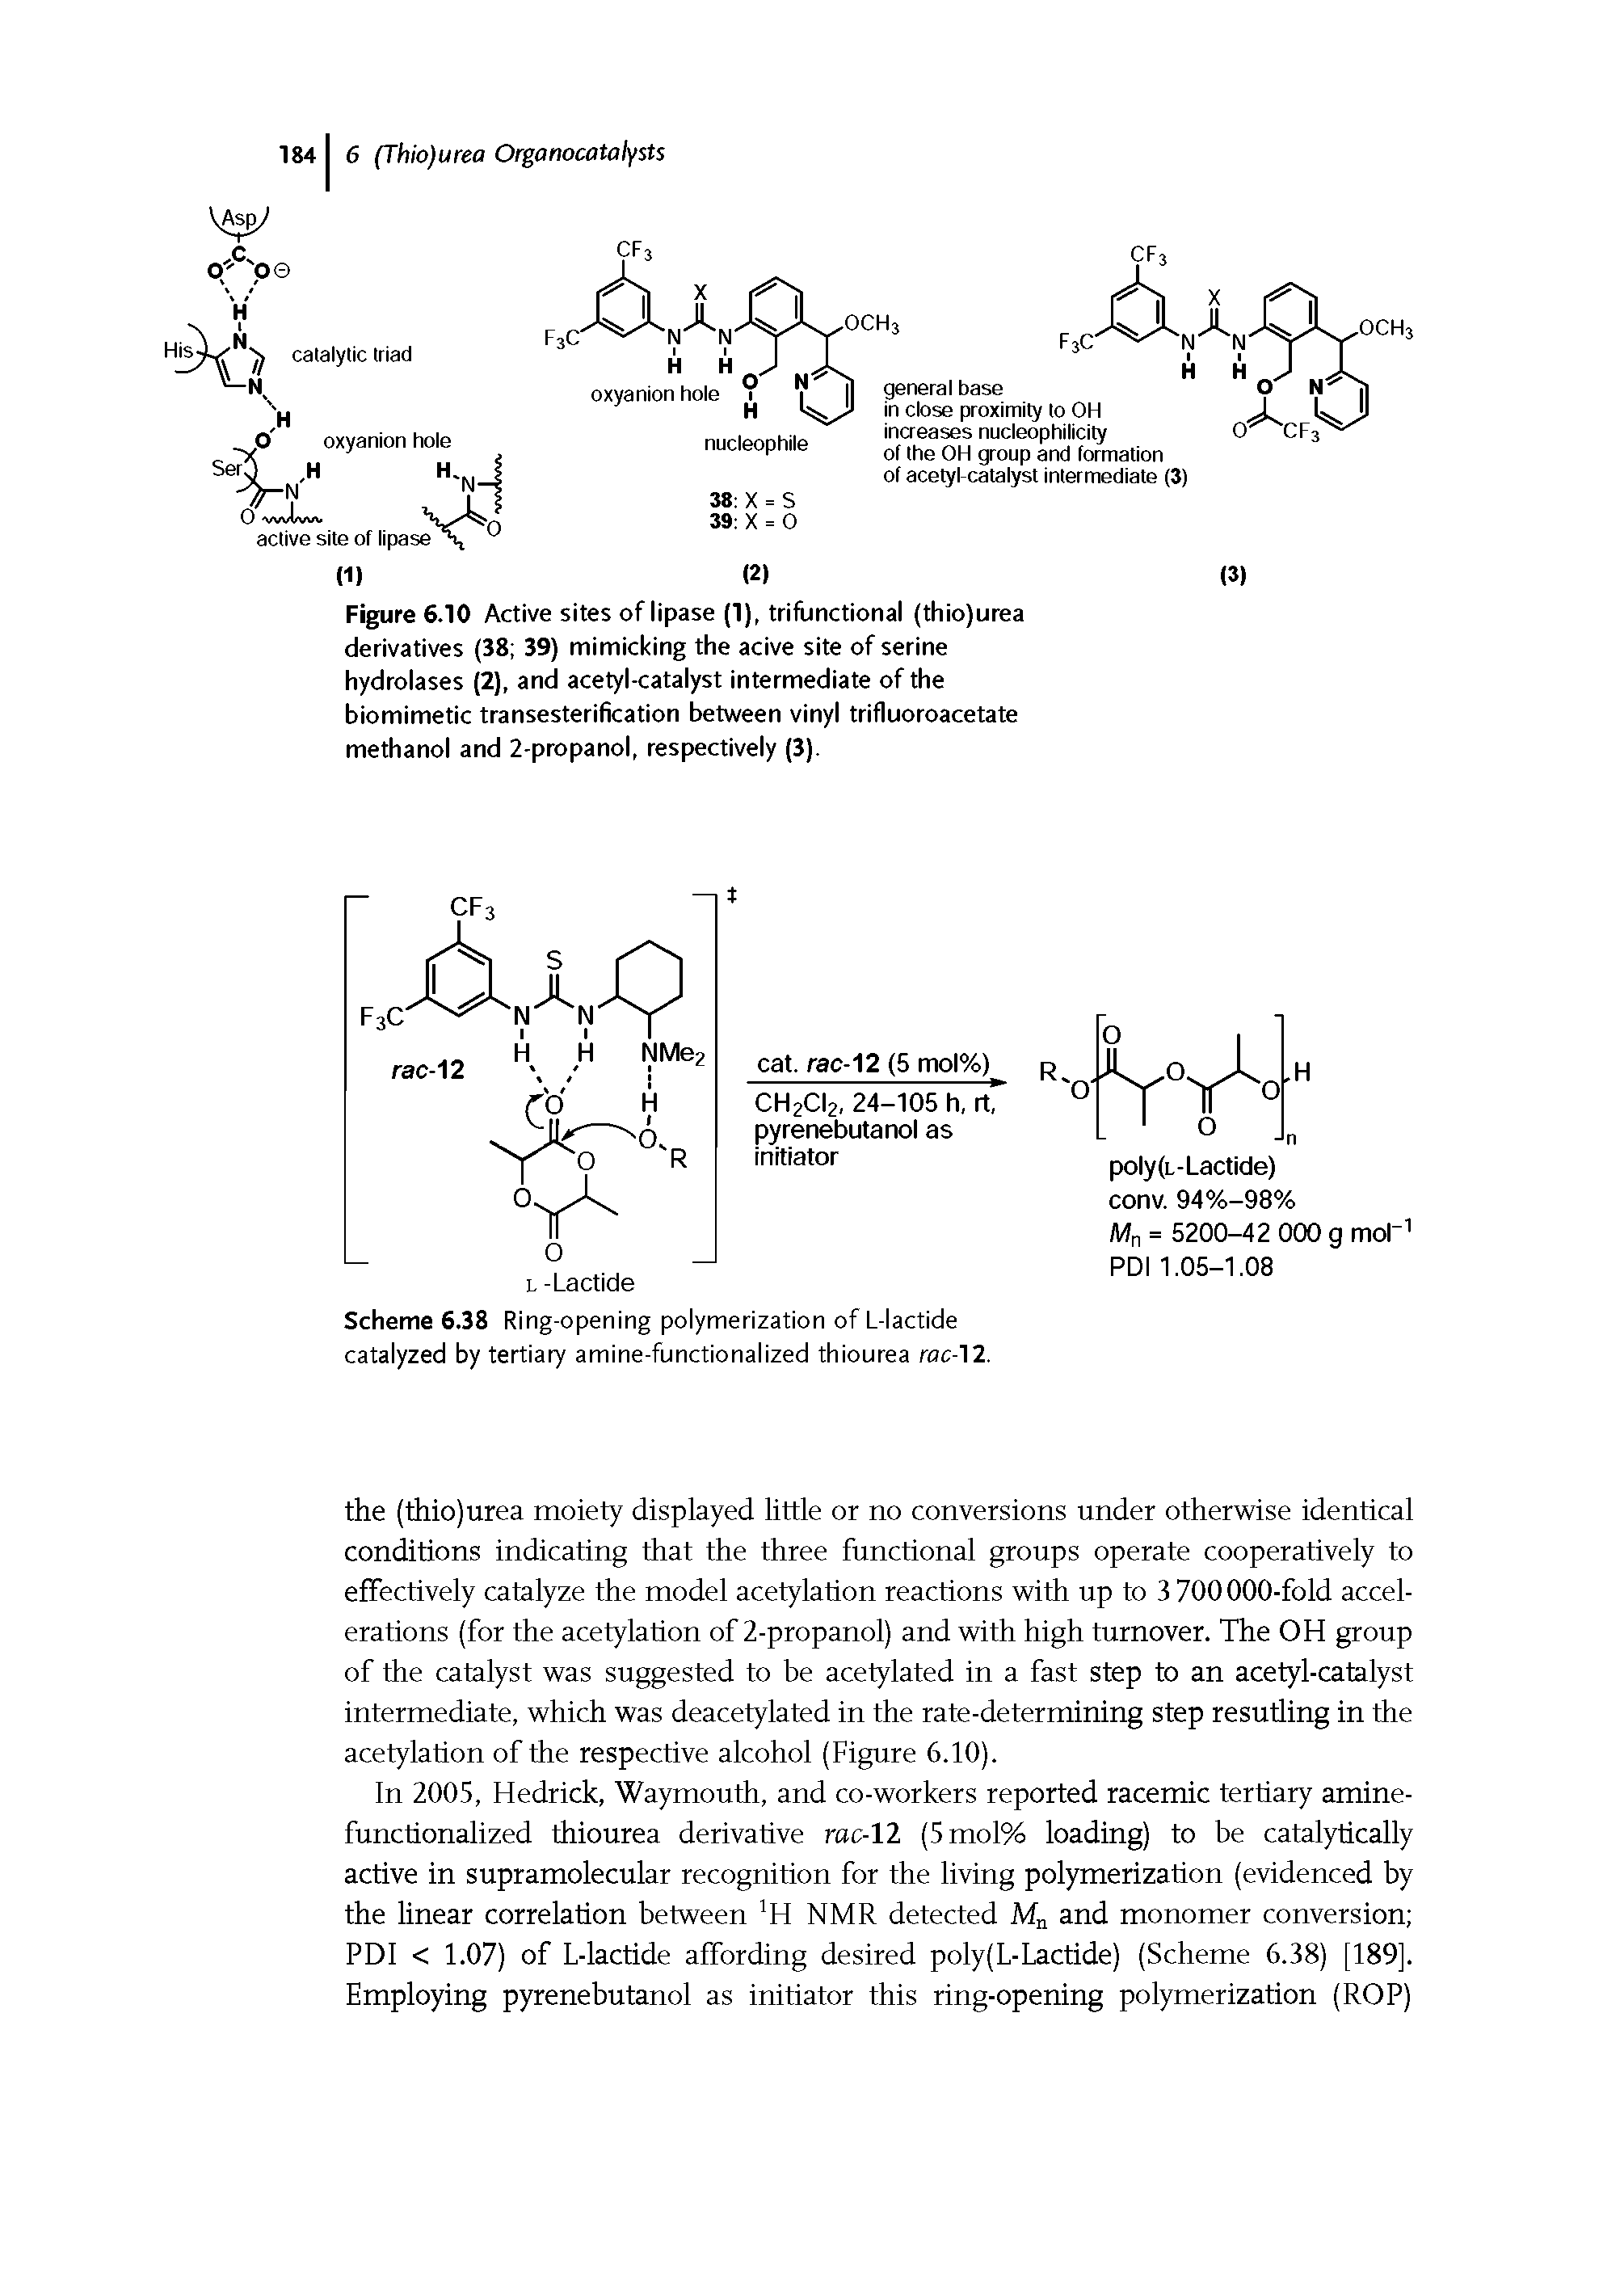 Scheme 6.38 Ring-opening polymerization of L-lactide catalyzed by tertiary amine-functionalized thiourea rac-12.